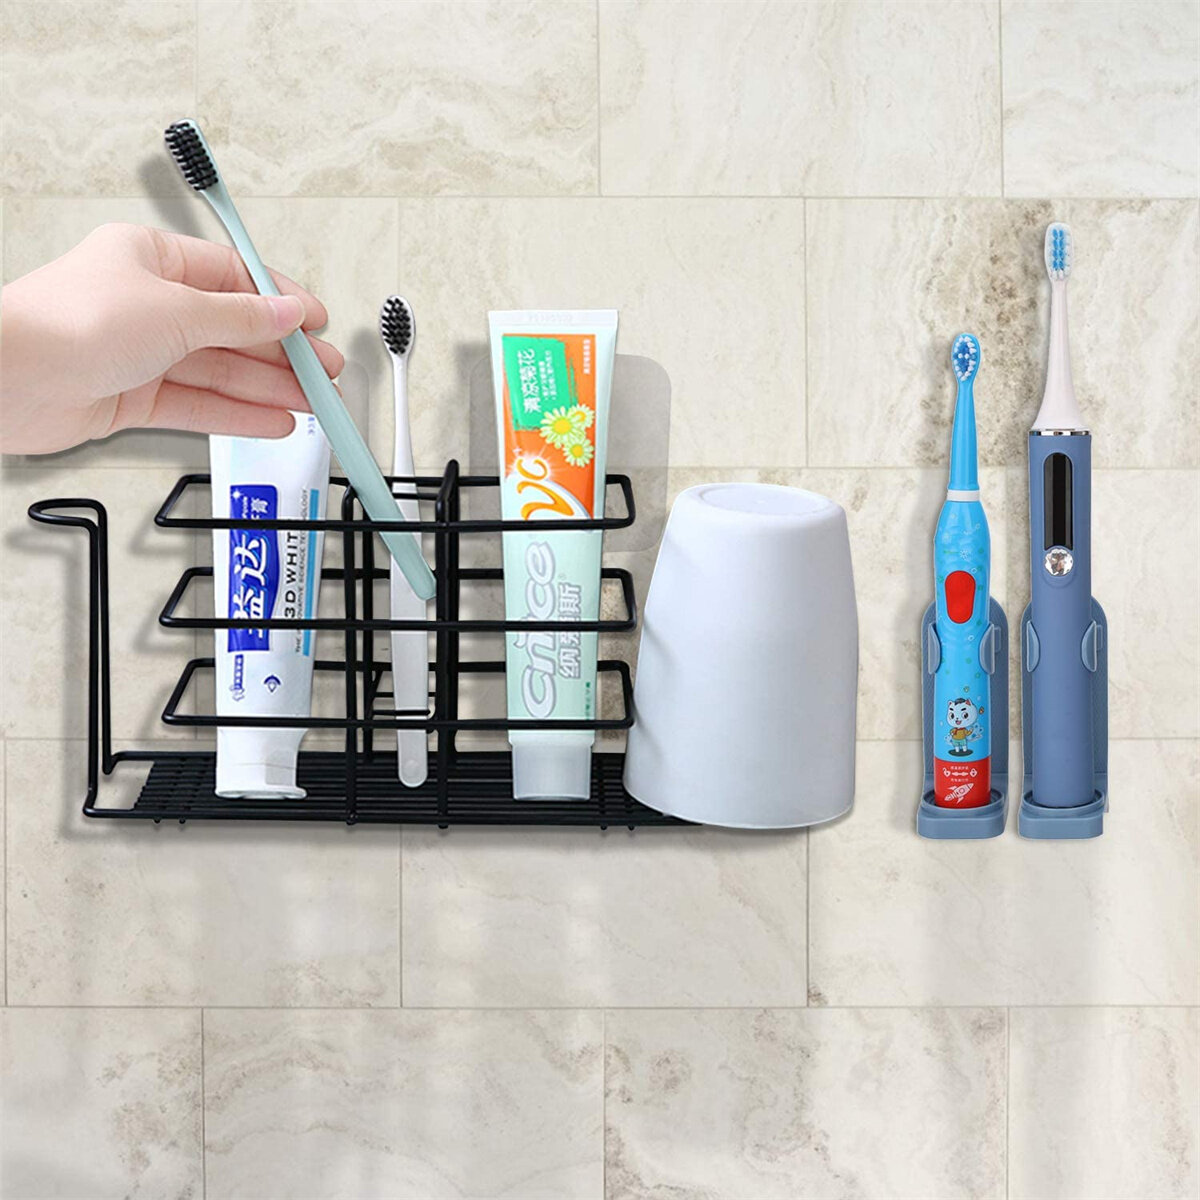 As Electric Toothbrush Holder and Toothpaste Organizer. Bathroom Accessories for Family 3 Toothbrush Slots and 2 Bathroom Cups J&S Toothbrush Holder for Bathroom White Kids 